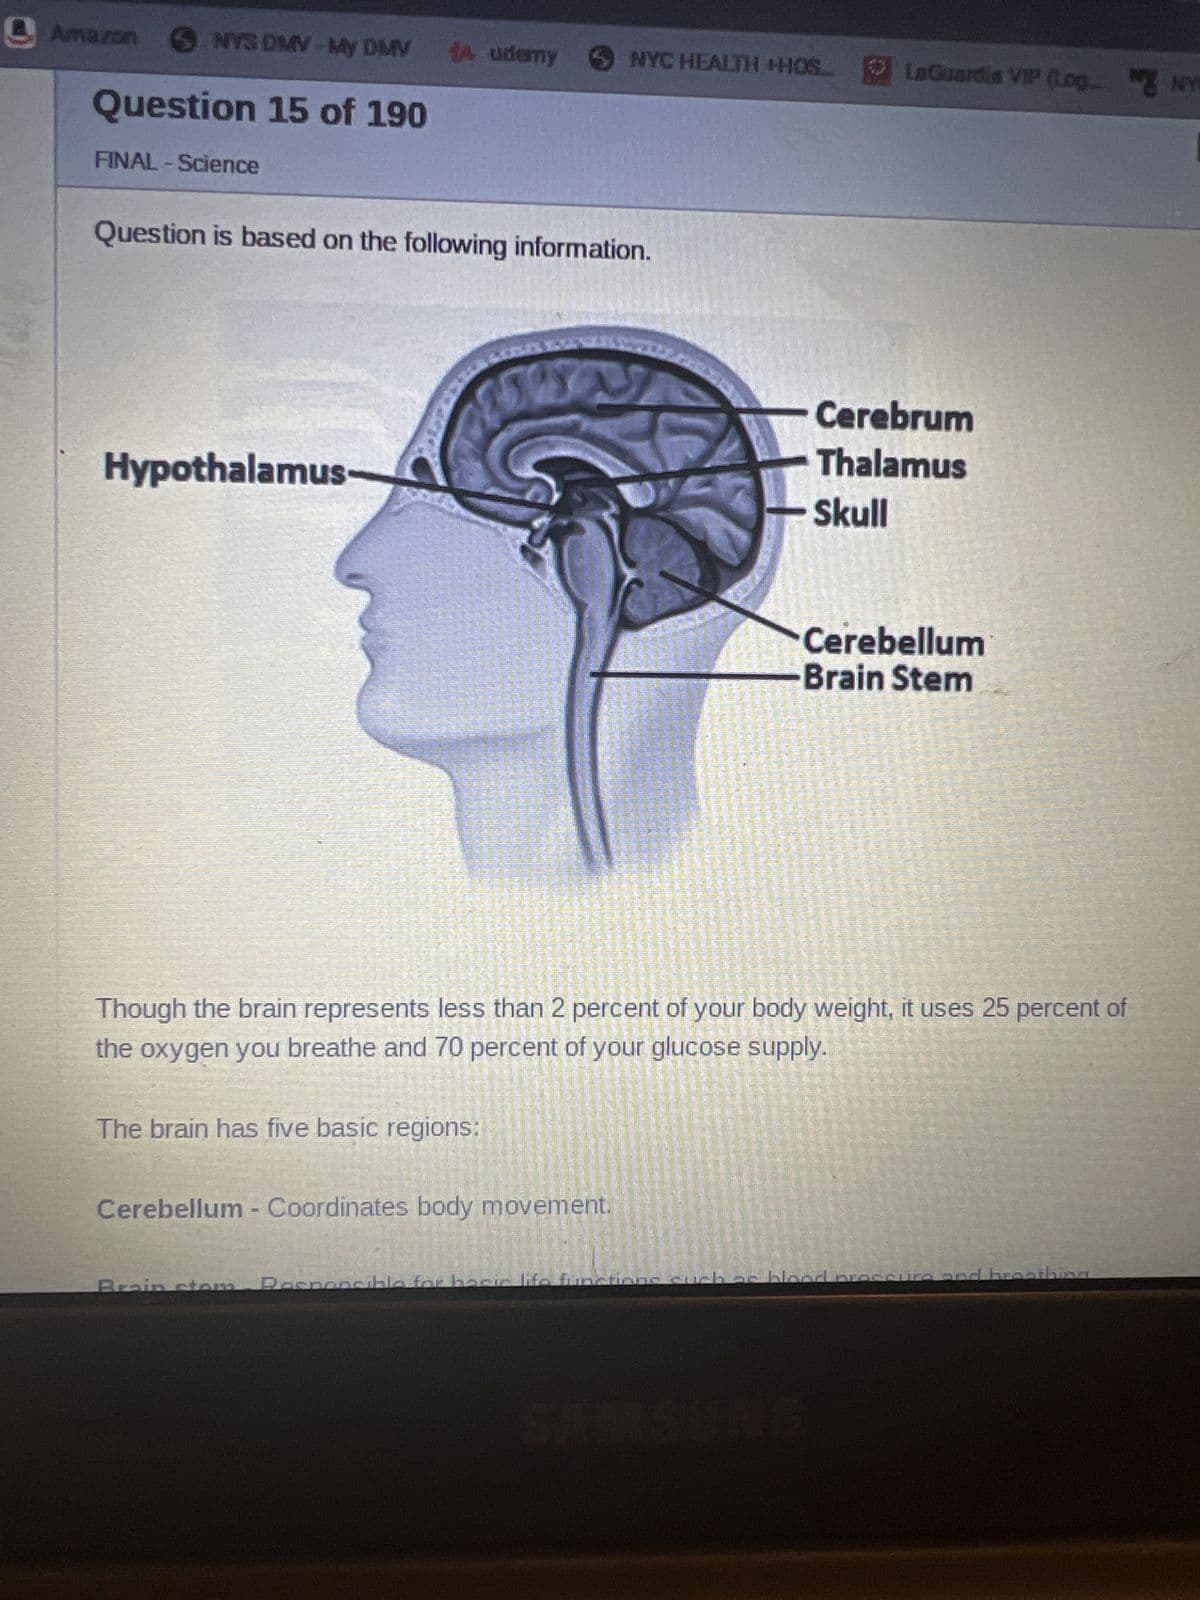 Amazon NYS DMV-My DMV ta udemy
Question 15 of 190
FINAL - Science
Question is based on the following information.
Hypothalamus-
The brain has five basic regions:
A
NYC HEALTH +HOS...
Cerebellum - Coordinates body movement.
Responsible for haric
Though the brain represents less than 2 percent of your body weight, it uses 25 percent of
the oxygen you breathe and 70 percent of your glucose supply.
LaGuardia VIP (Log. NY
uel
Cerebrum
Thalamus
Skull
Cerebellum
Brain Stem
e and bro
bing